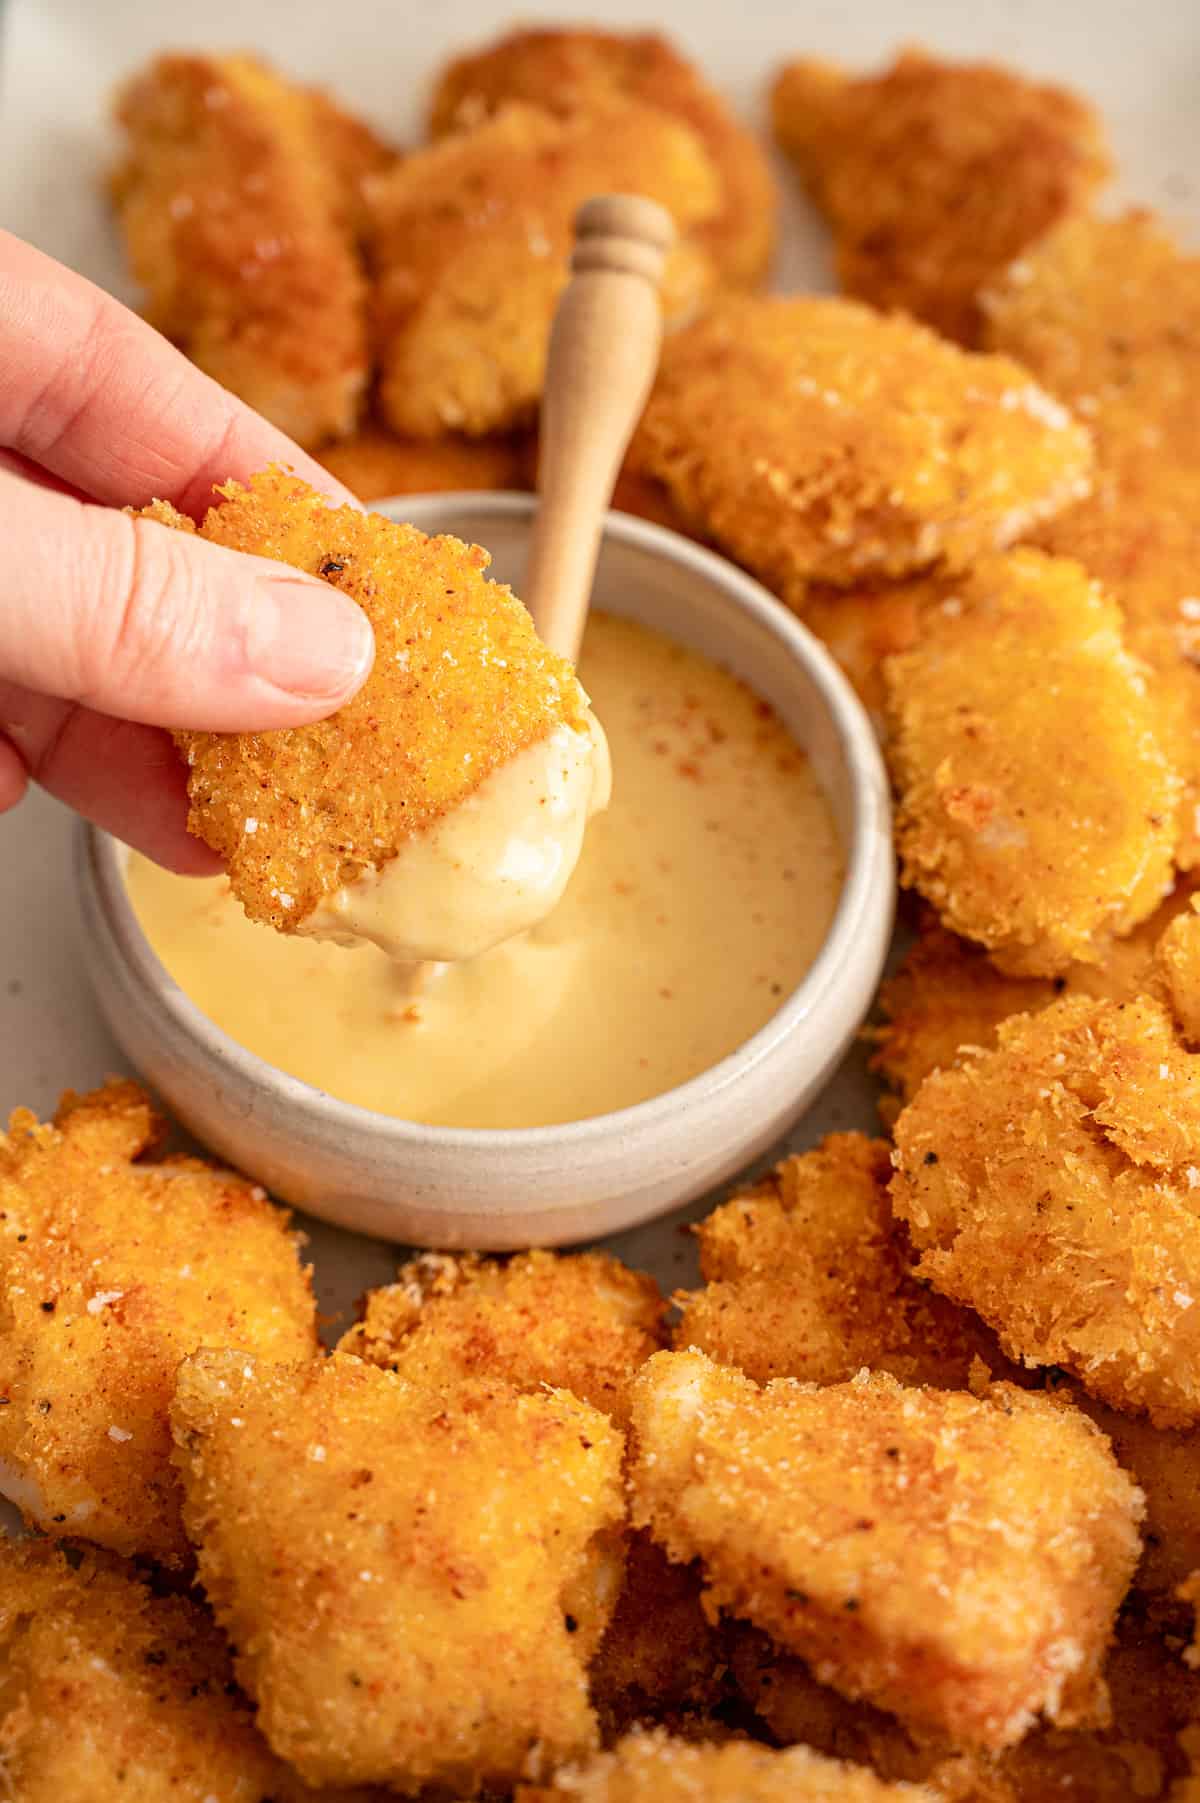 Hand dipping a chicken nugget into honey mustard dripping sauce.